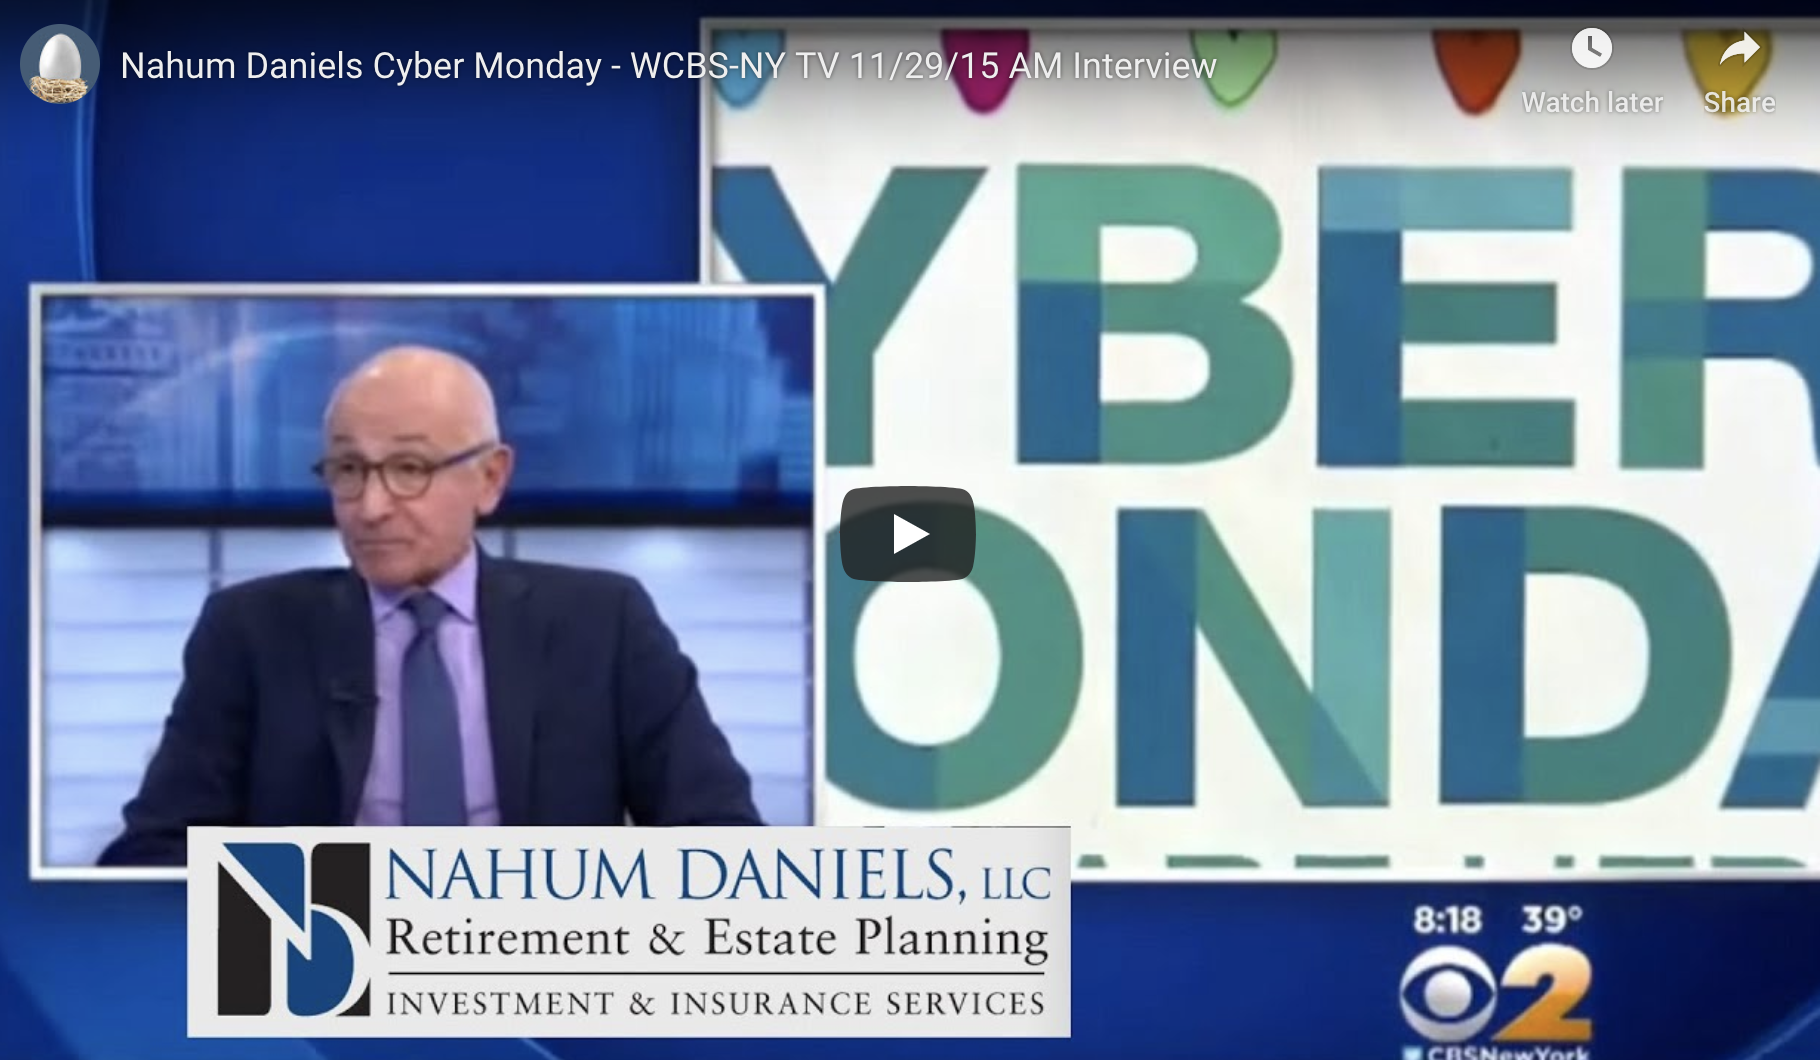 Nahum Daniels Cyber Monday – WCBS-NY TV 11/29/15 AM Interview